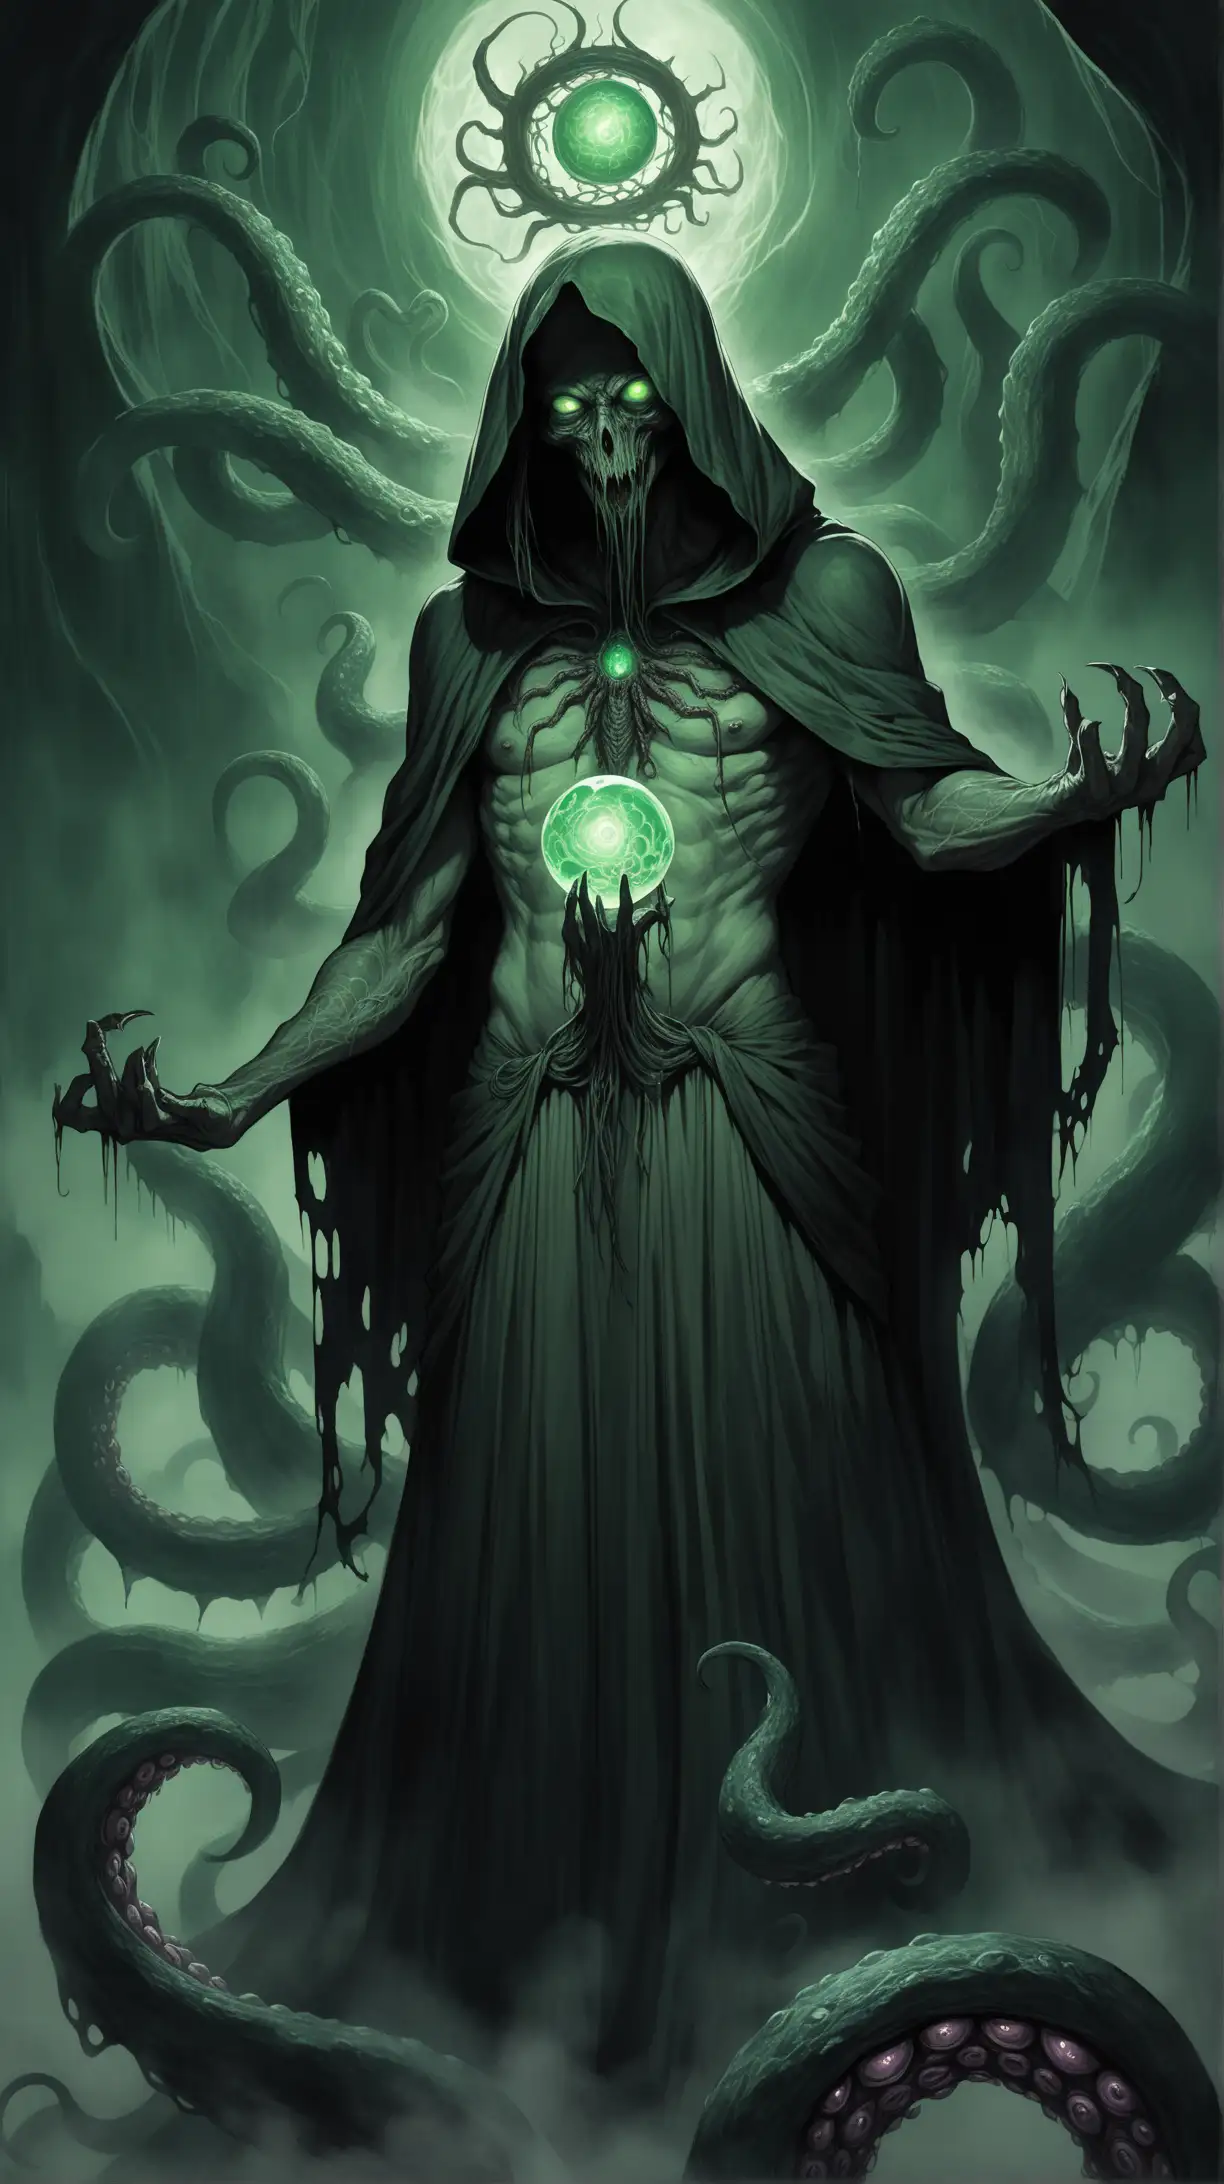 "Create a chilling full-bodied illustration of a Lovecraftian-inspired male deity draped in a tattered, dark green hooded cloak, blending the cosmic horror of Lovecraft's mythos with the terrifying imagery of illustrative horror, drawing influence from the enigmatic allure of the Madonna. Detail the deity's grotesque and imposing form, exuding an aura of dread and malevolence. His body contorts and mutates unnaturally beneath the cloak, with unnaturally thin long, sinewy limbs and fingers stretching out in a wiry and muscular physique. Writhing tentacles, extremely long gnarled limbs, and pulsating appendages protrude from under his garments. The hood obscures his face in shadow, leaving only darkness and the glint of large glowing green spider-like eyes. Surrounding his head is an emerald green halo, adding to his unearthly presence. Capture the essence of cosmic horror in his monstrous visage, conveying a sense of ancient malevolence and eldritch power beyond mortal comprehension. Perhaps he is a manifestation of the unknowable horrors lurking beyond the veil of reality, his presence evoking both fascination and terror in equal measure. Set the deity against a backdrop of twisted and otherworldly landscapes, shrouded in mist and shadow, to enhance the atmosphere of dread and foreboding. Infuse the artwork with the dynamic and expressive qualities of illustrative horror, using exaggerated features, grotesque details, and dramatic lighting to evoke a sense of terror and unease. Tags: dark, psychological, Lovecraftian, horror, deity, monstrous, illustrative horror, cosmic horror, Madonna inspiration." shirtless, long skirt, green energy orb on chest